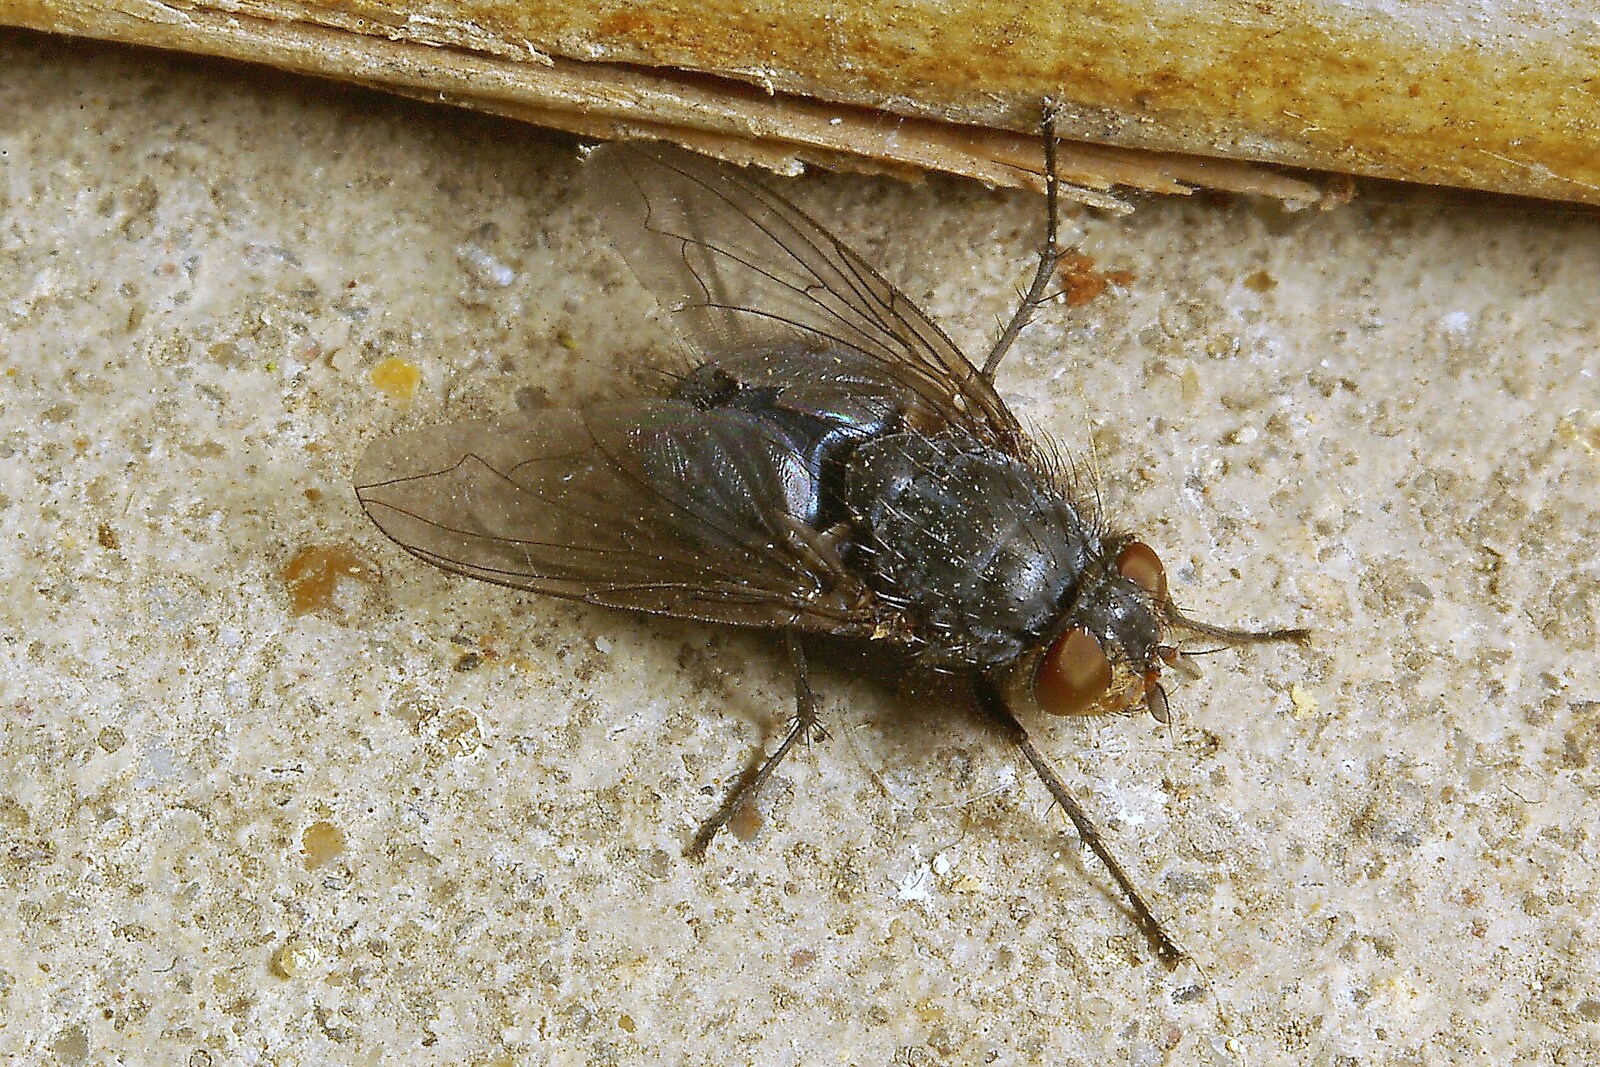 A housefly from Fun With Bellows: Macro Photography, Brome, Suffolk - 13th May 2006